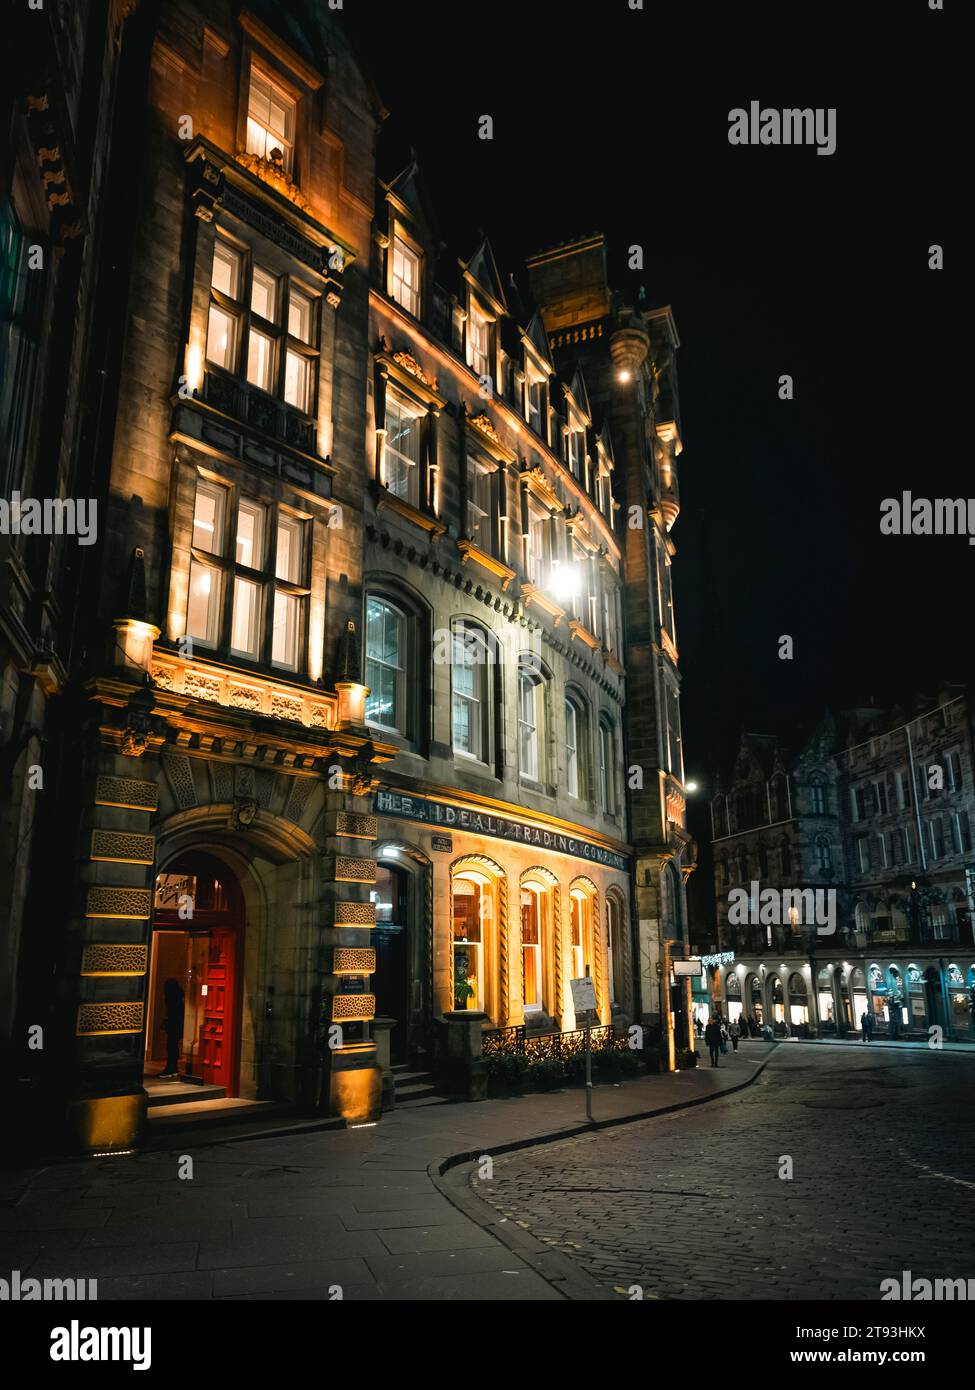 Exterior view at night of Virgin Hotels on Victoria Street in Edinburgh Old Town, Scotland, UK Stock Photo